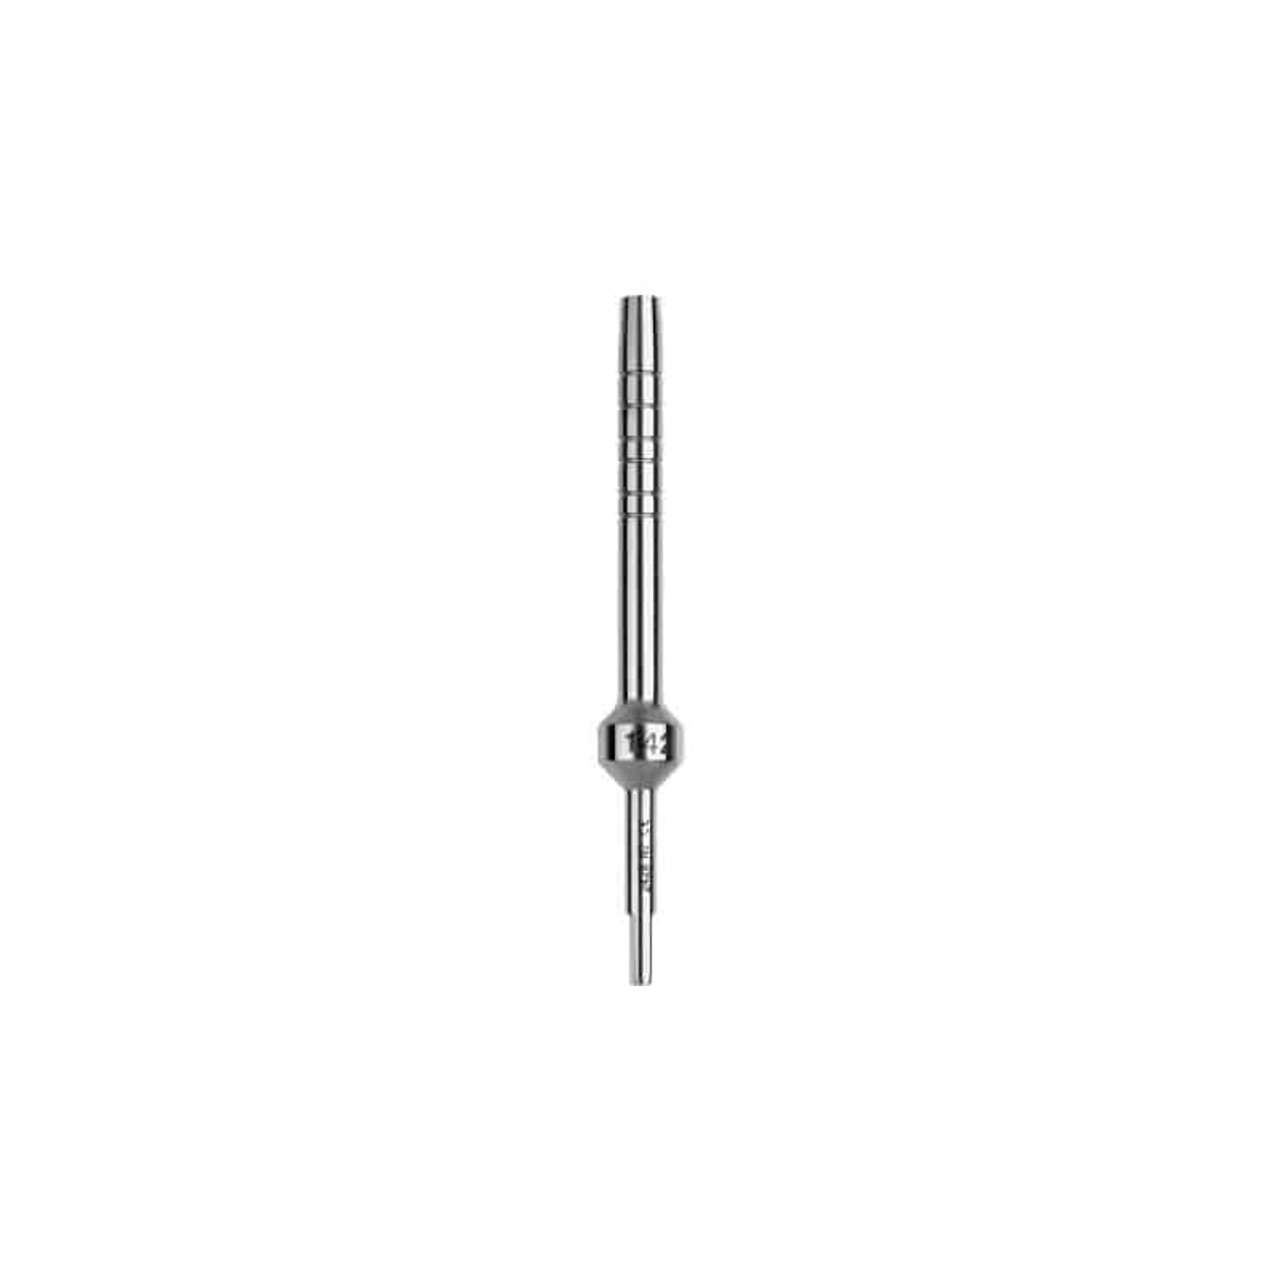 Hu-Friedy - 4.2 mm Osteotome Tapered Concave - Straight Tip